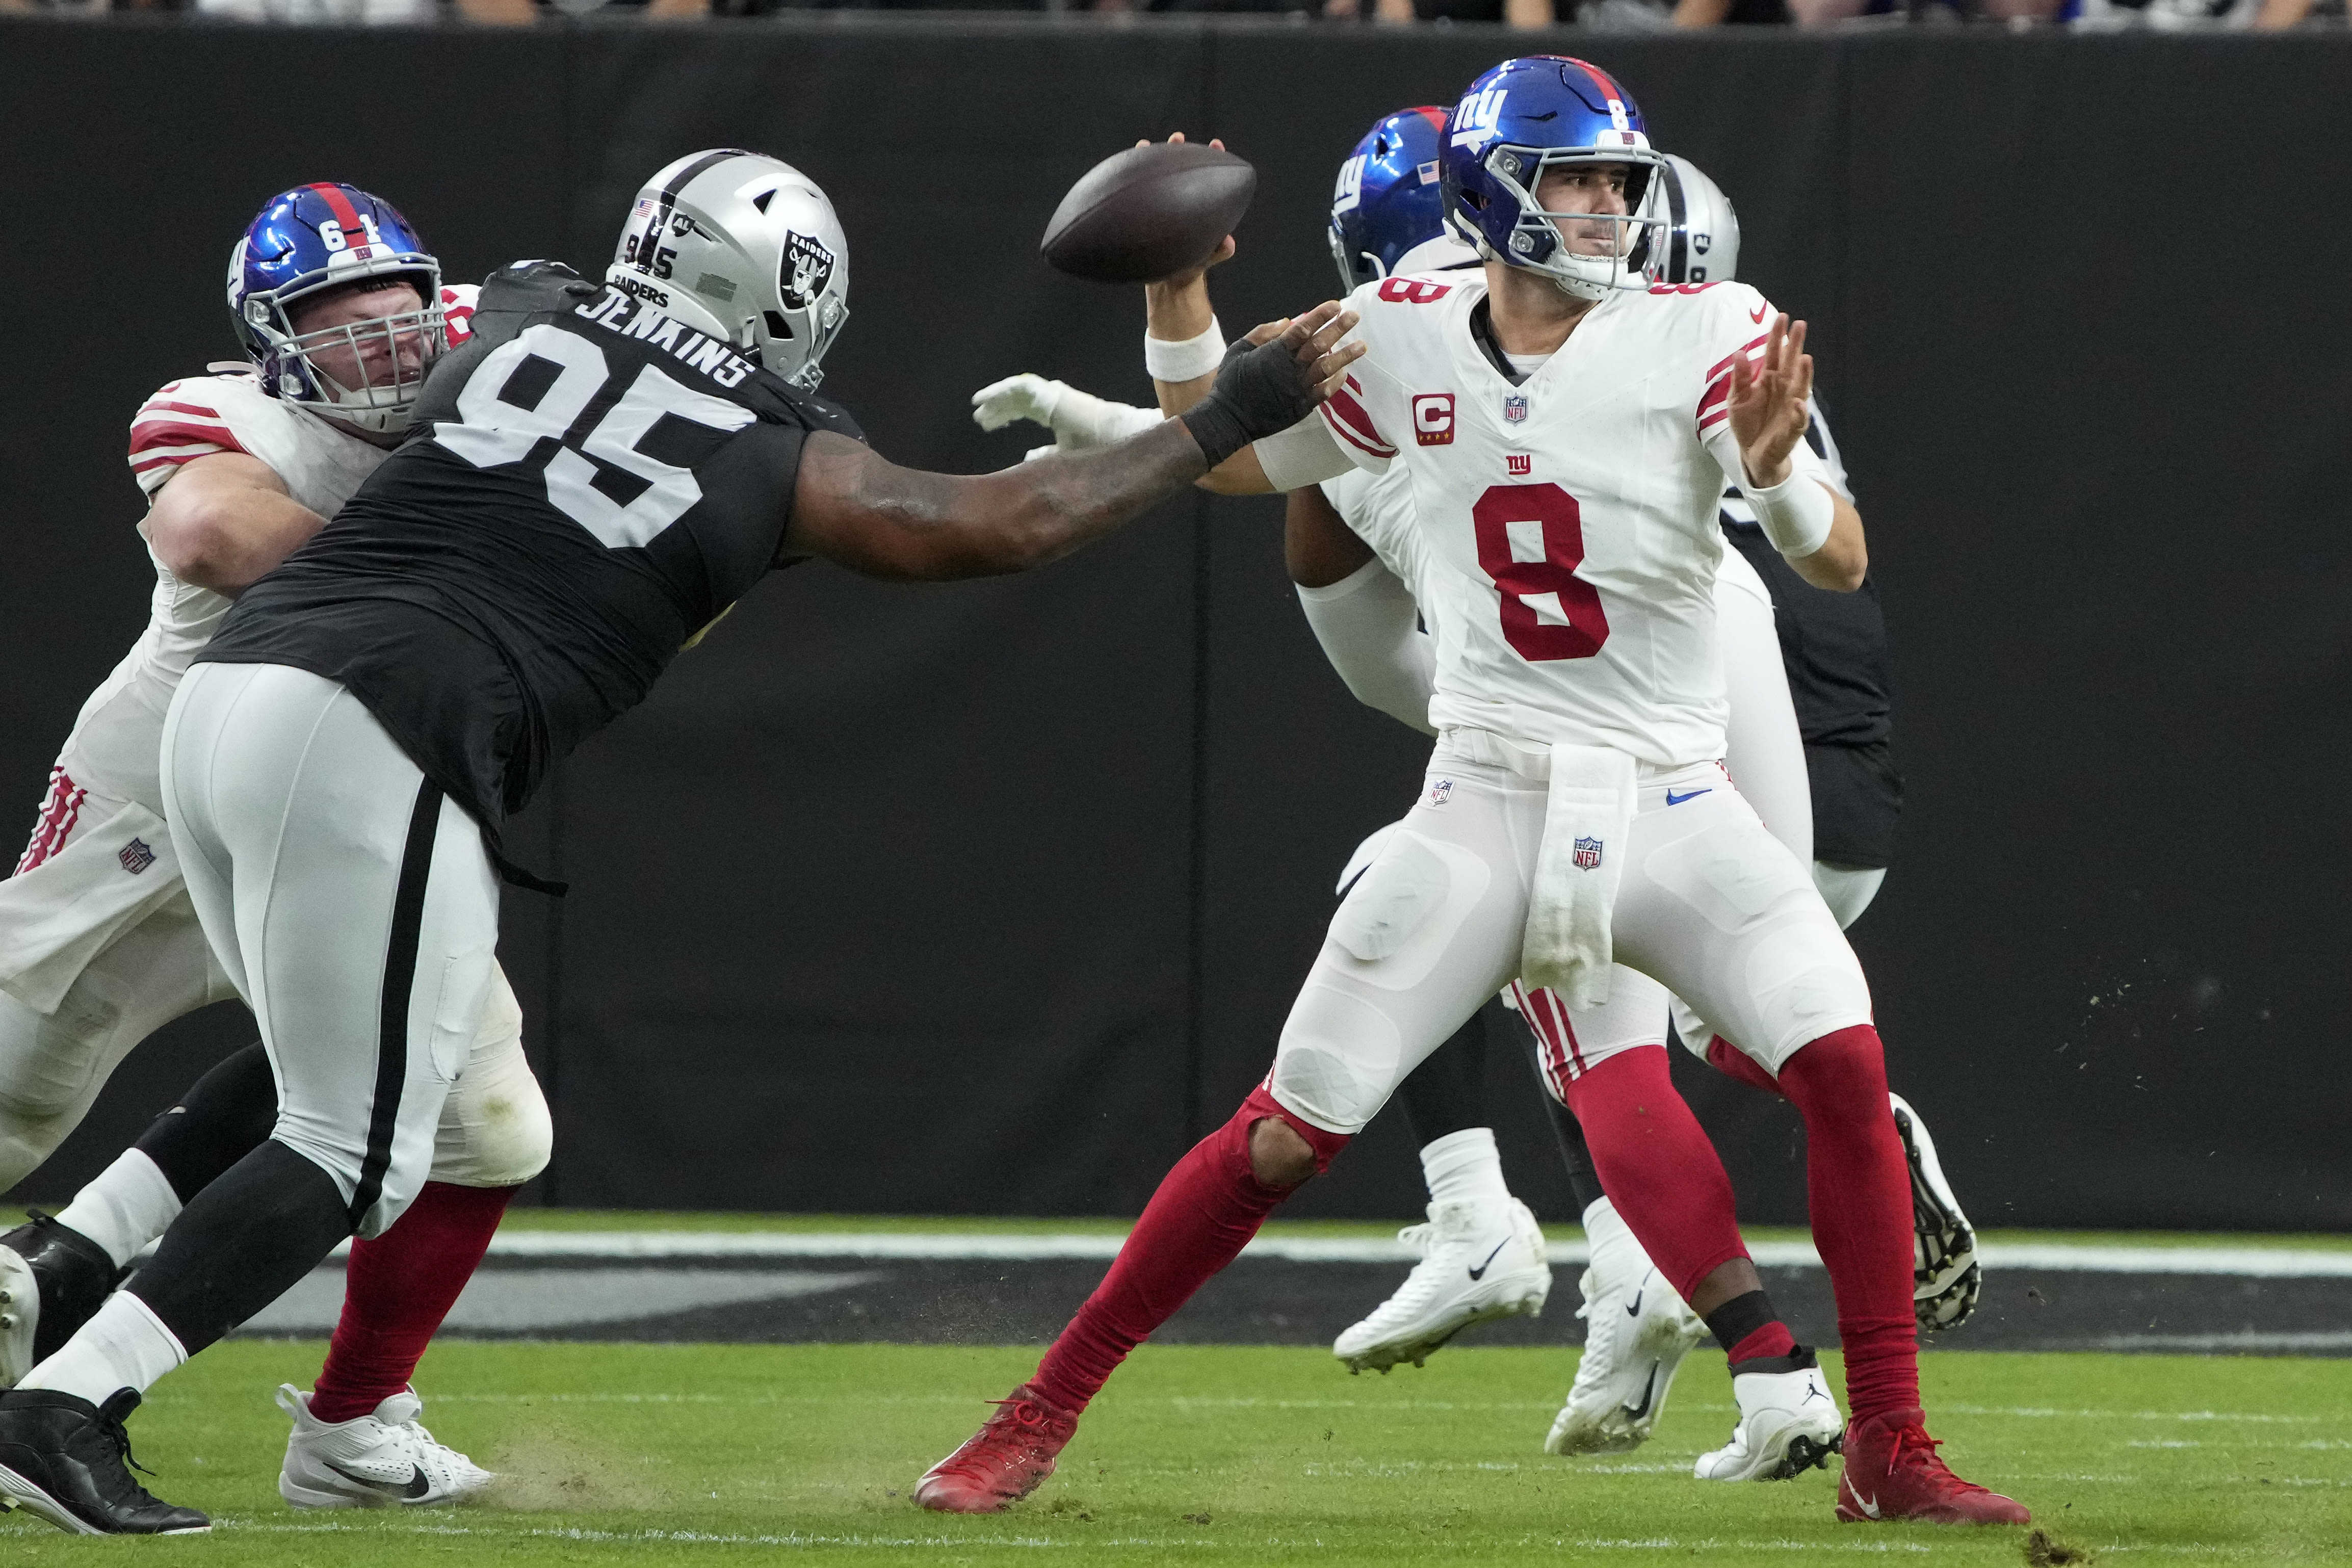 Giants expect Daniel Jones to be their starting QB once he